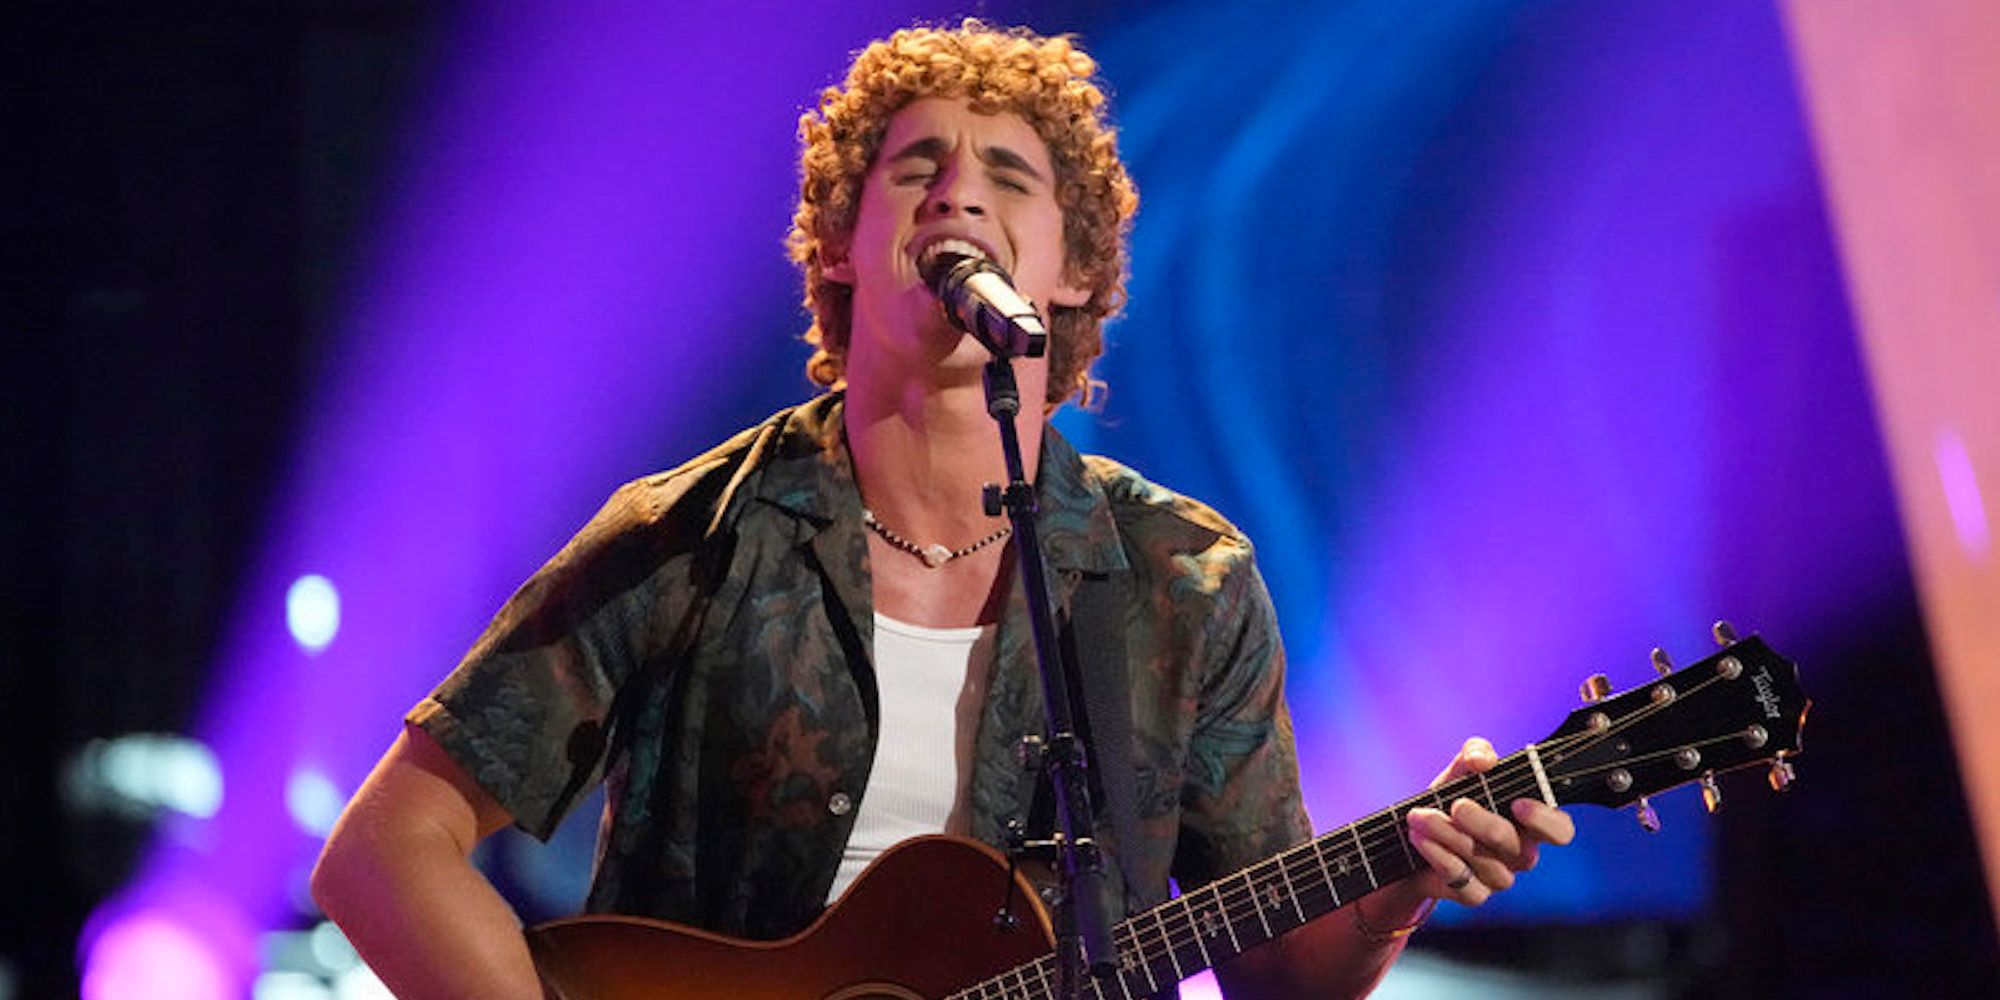 Gabriel Goes auditions for 'The Voice' accompanied by an acoustic guitar